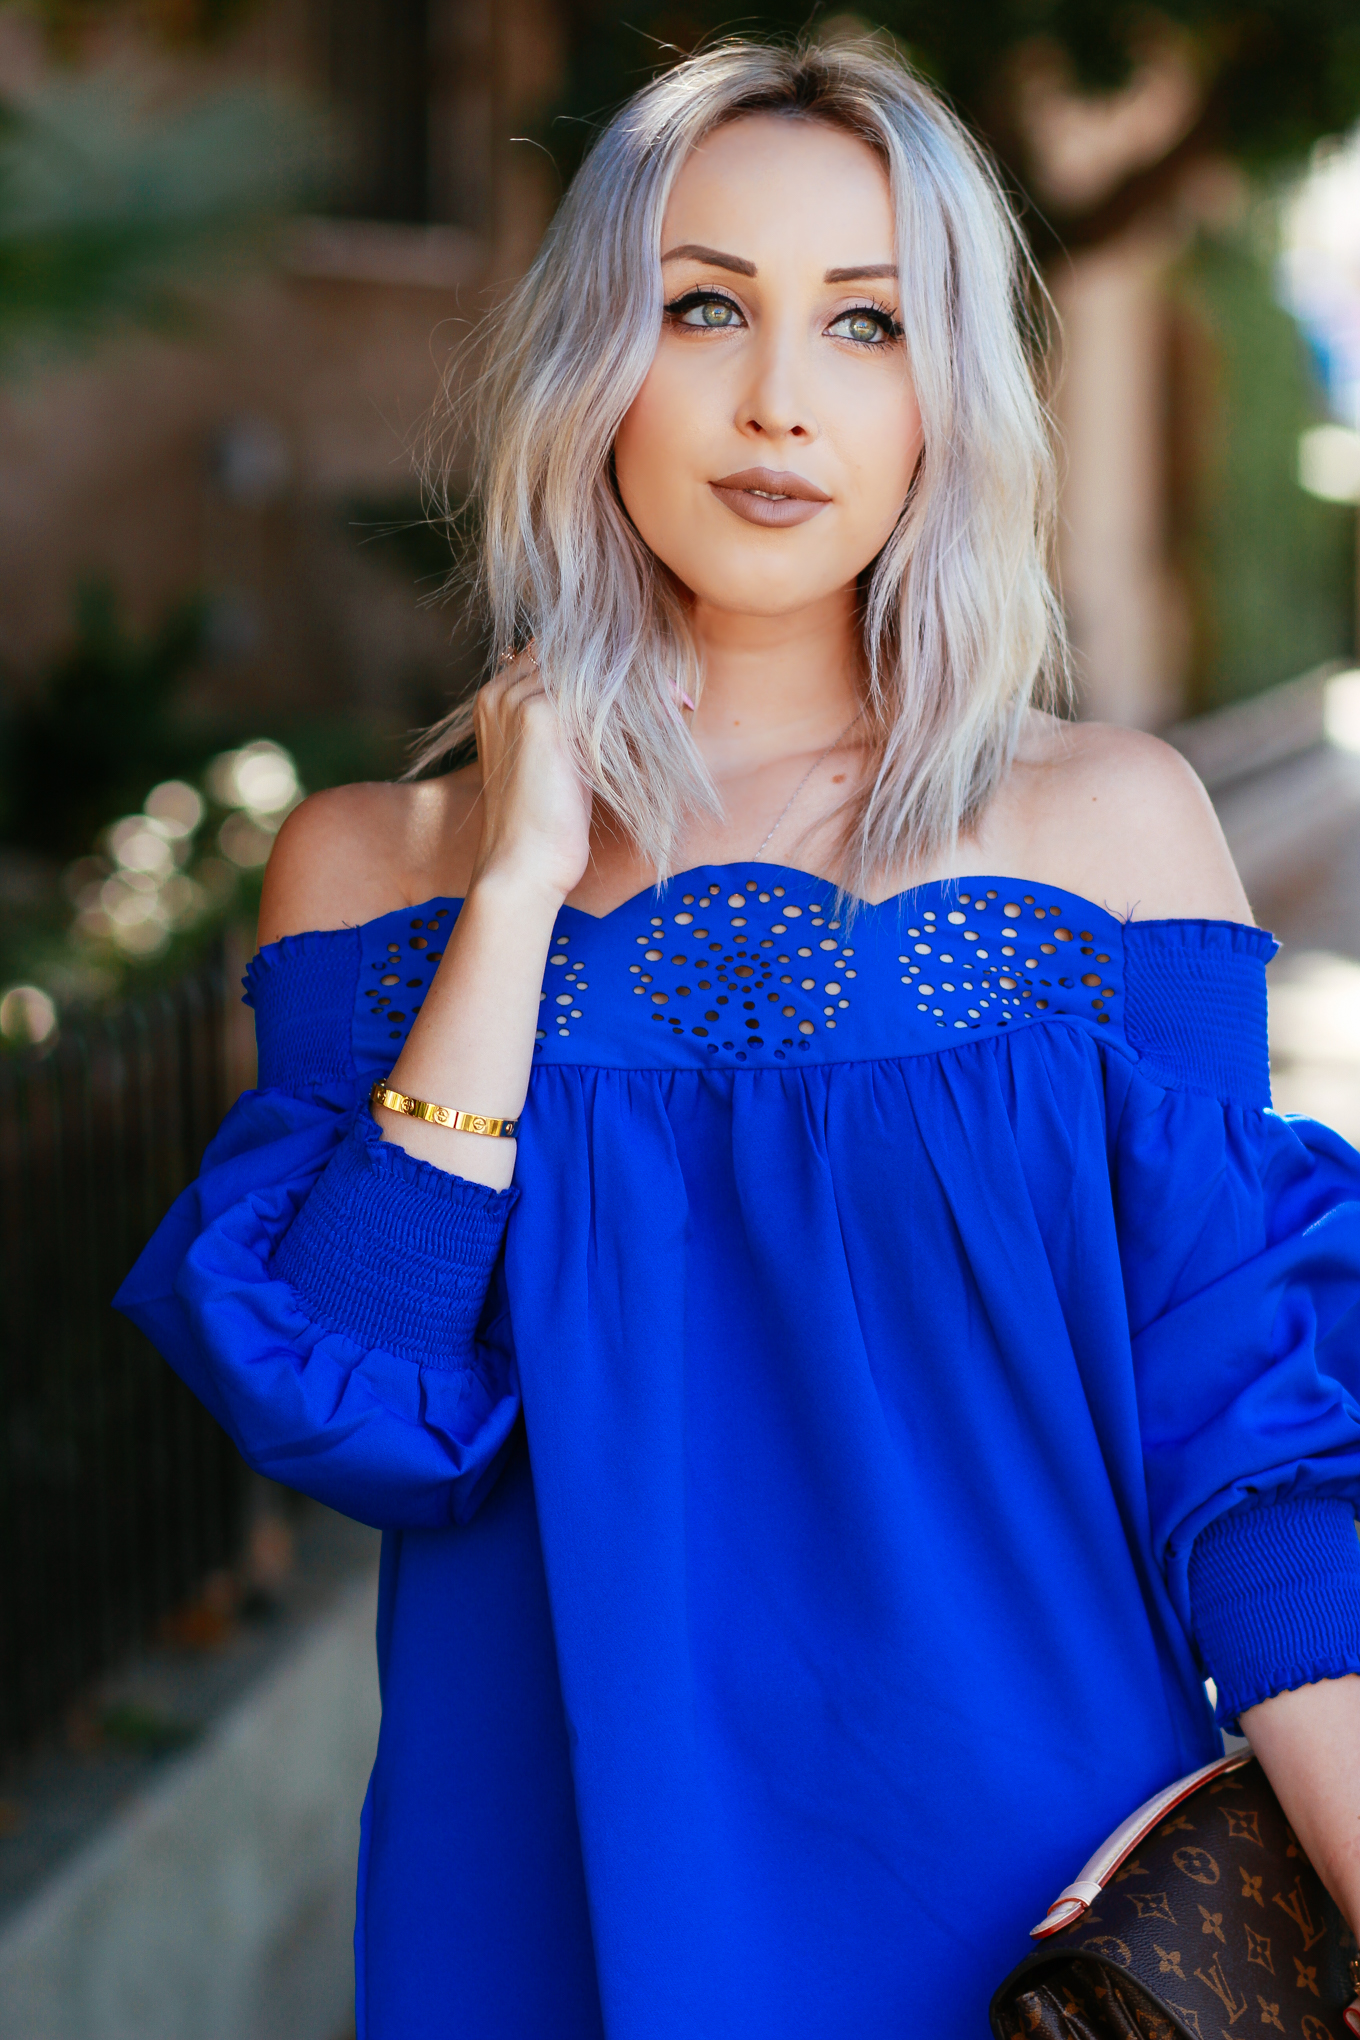 Blondie in the City | Bright Blue Scalloped Off The Shoulder Dress | Louis Vuitton Pochette Metis